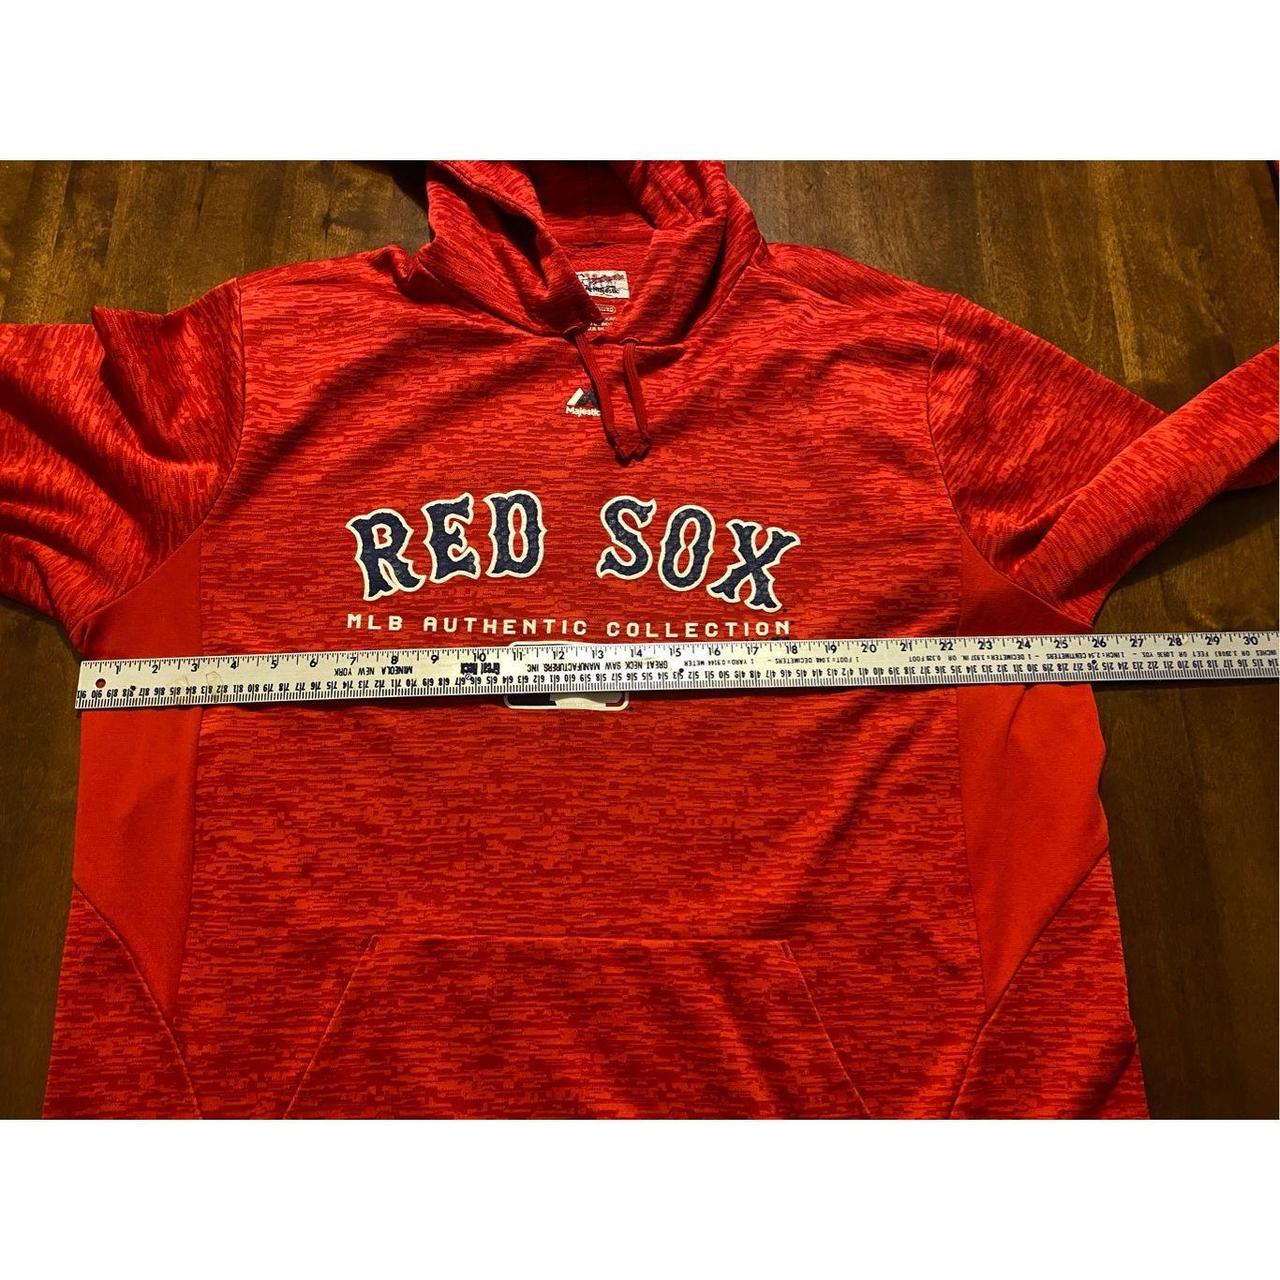 Boston Red Sox Sweater Pull Over Hoodie Majestic - Depop